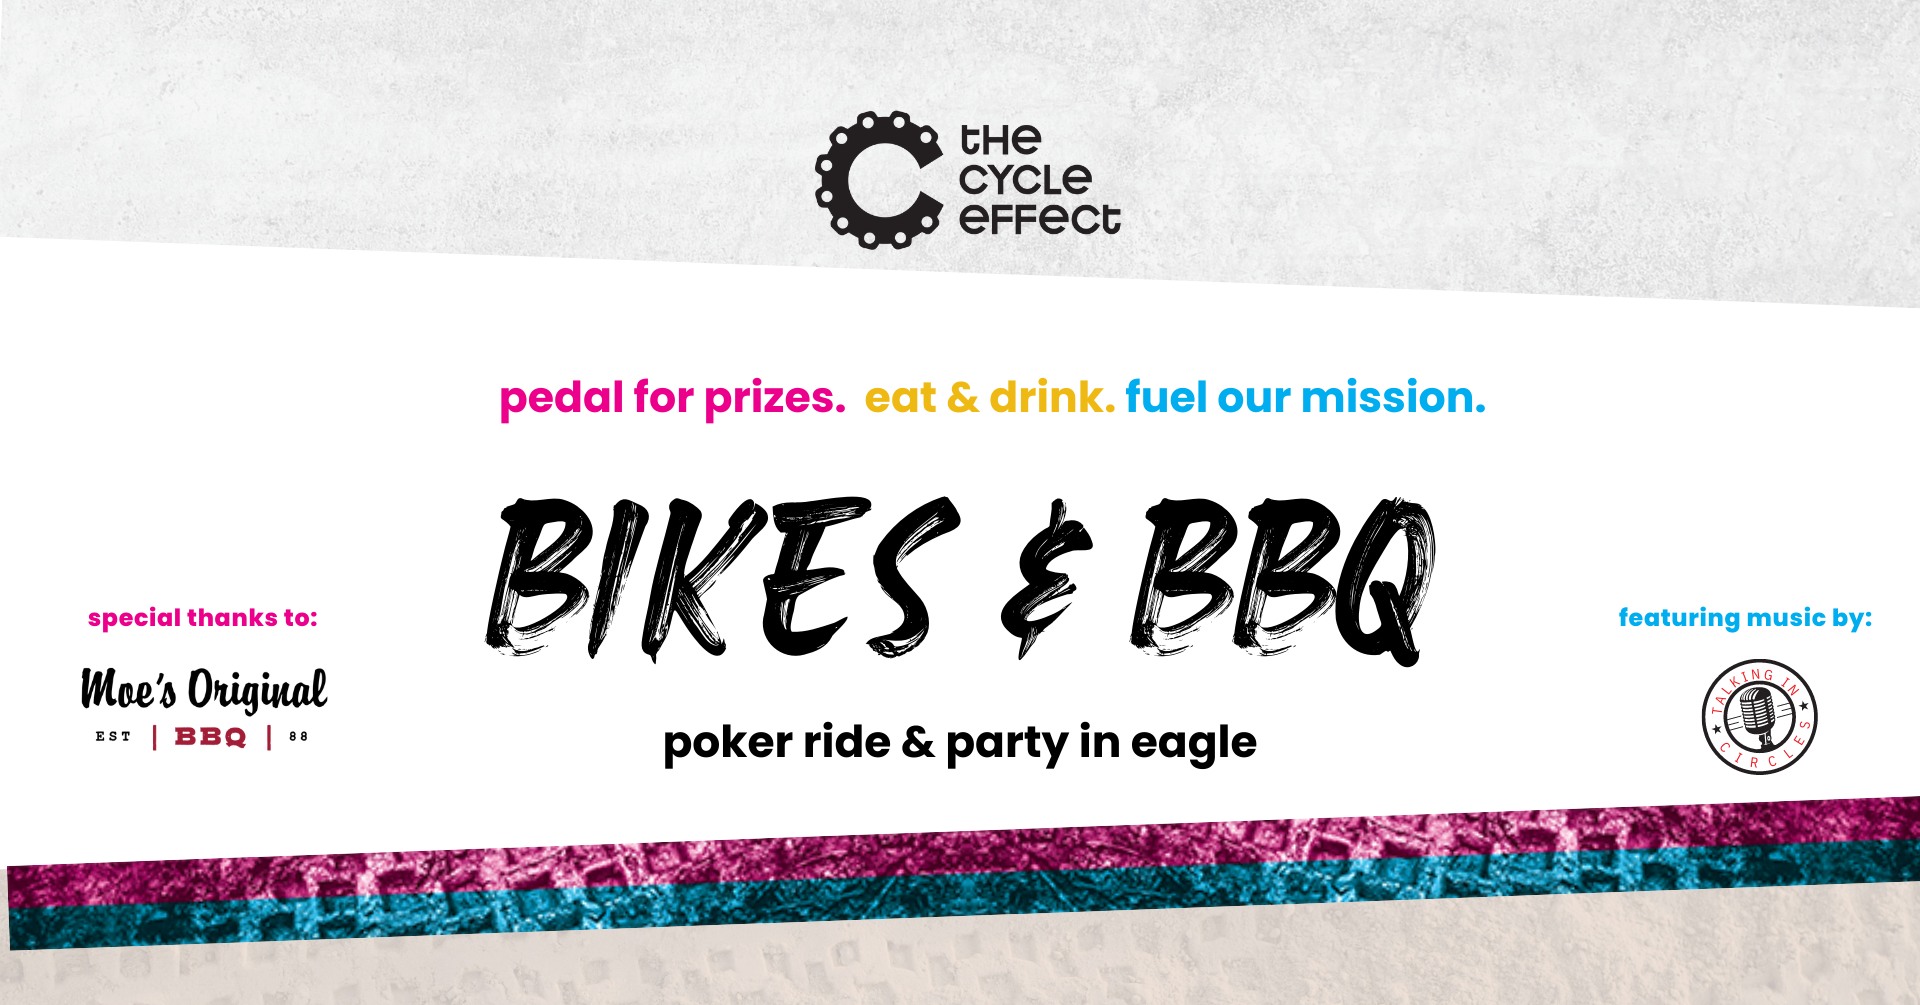 The Cycle Effect Bikes & BBQ